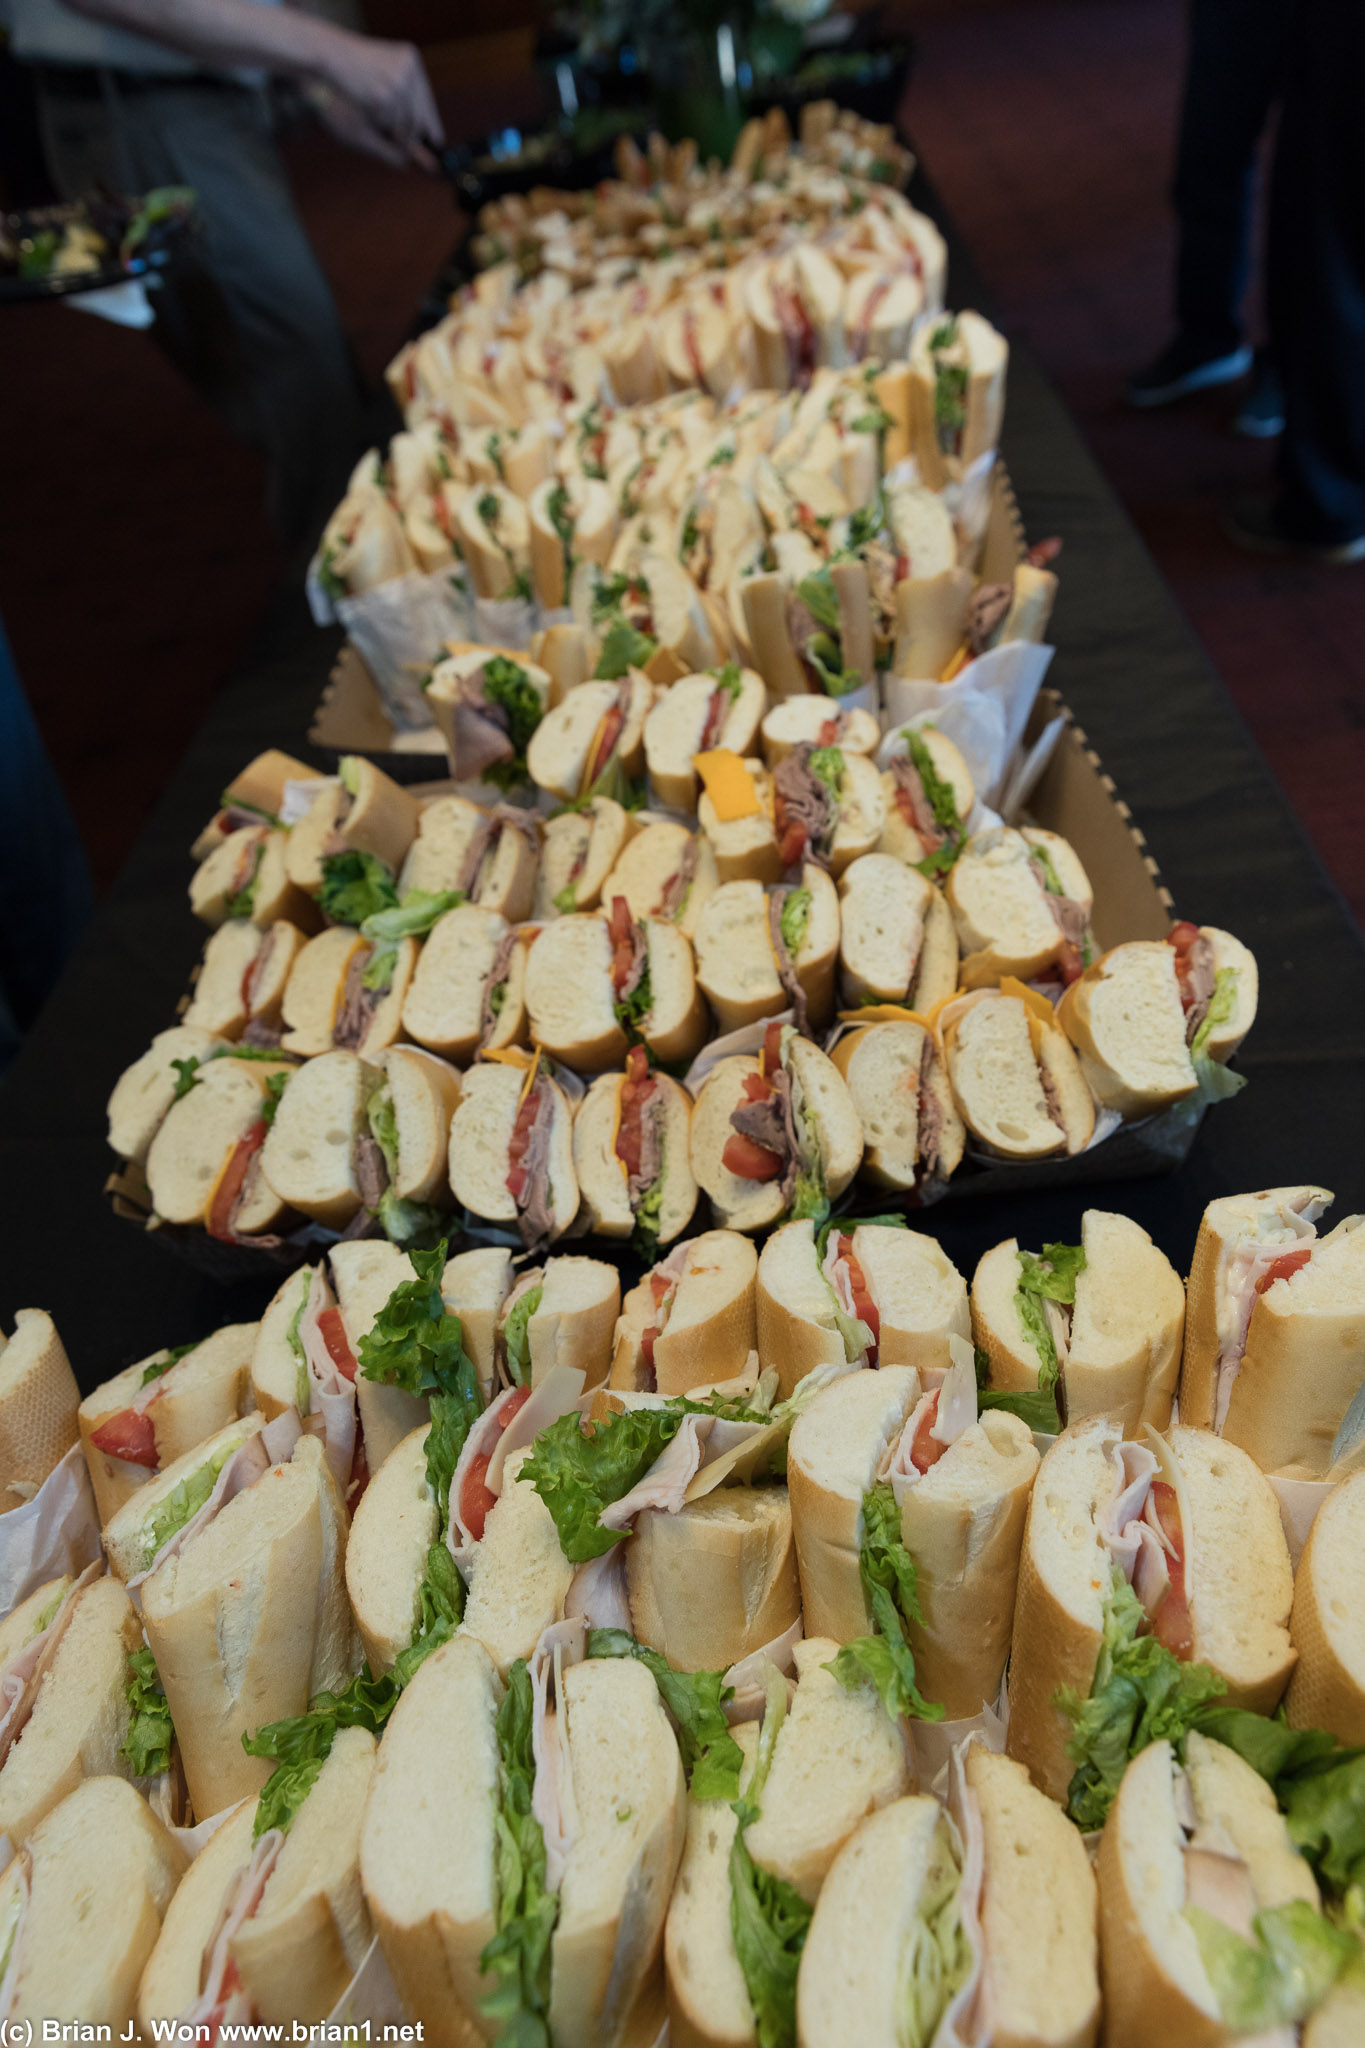 Sandwiches. Lots of sandwiches.